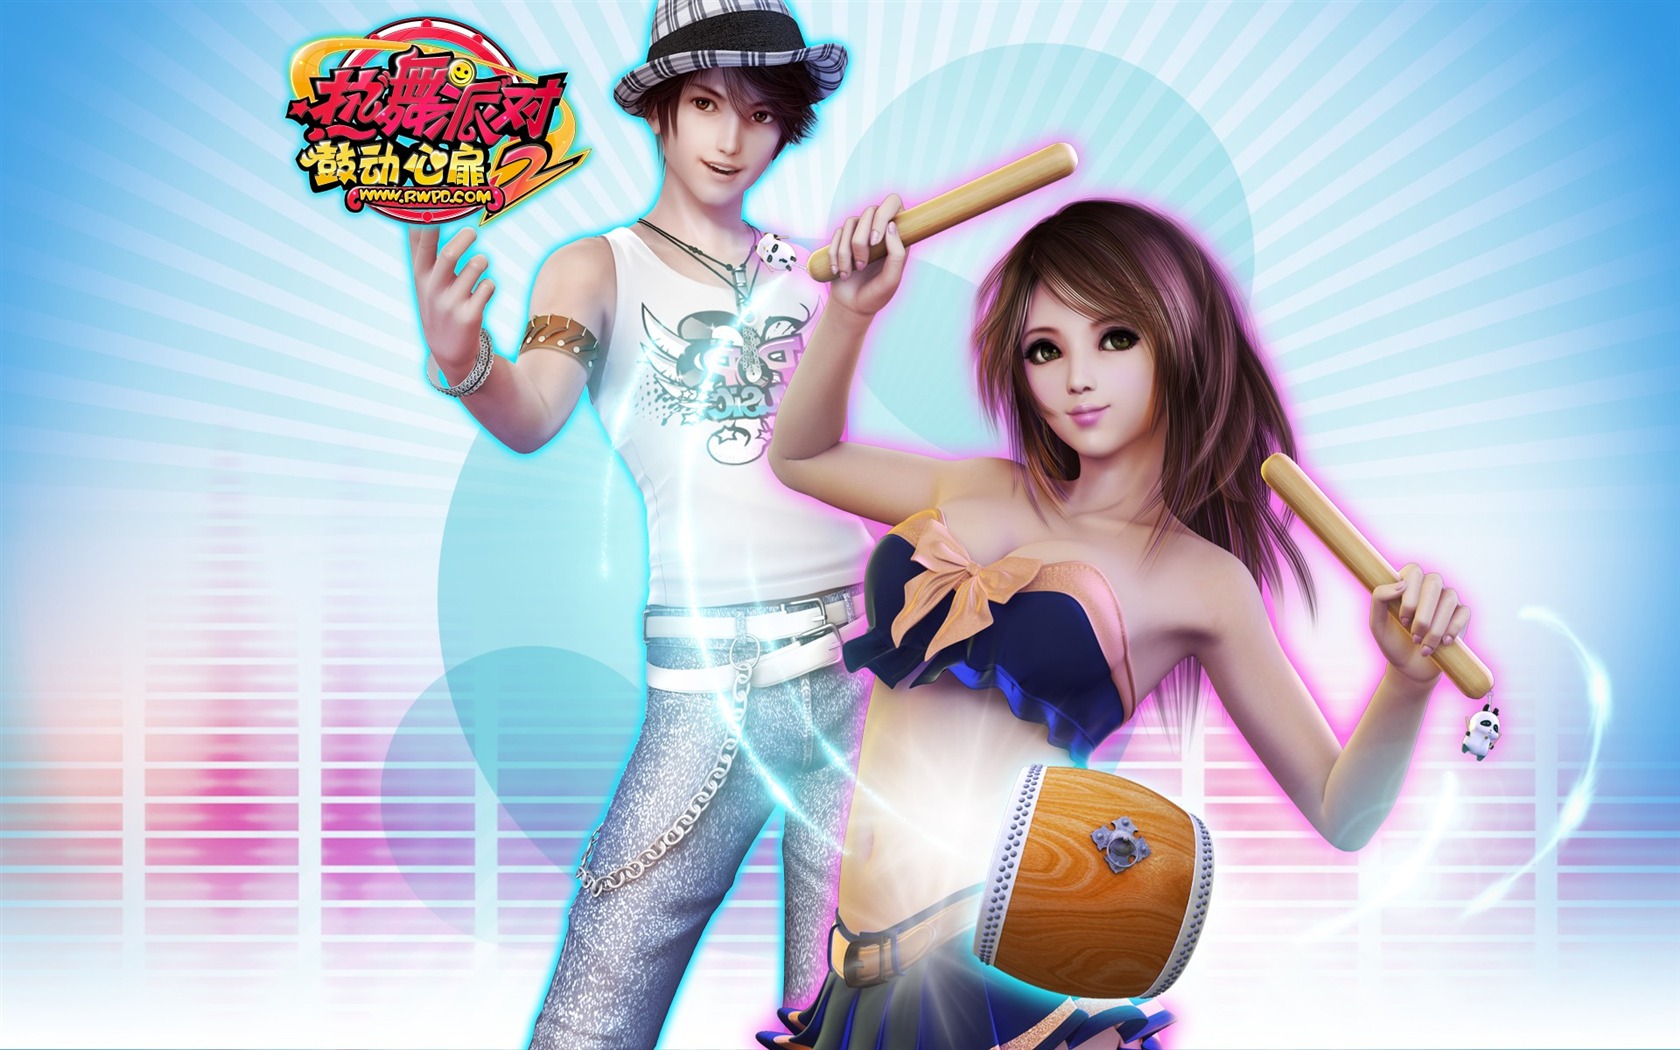 Online game Hot Dance Party II official wallpapers #14 - 1680x1050